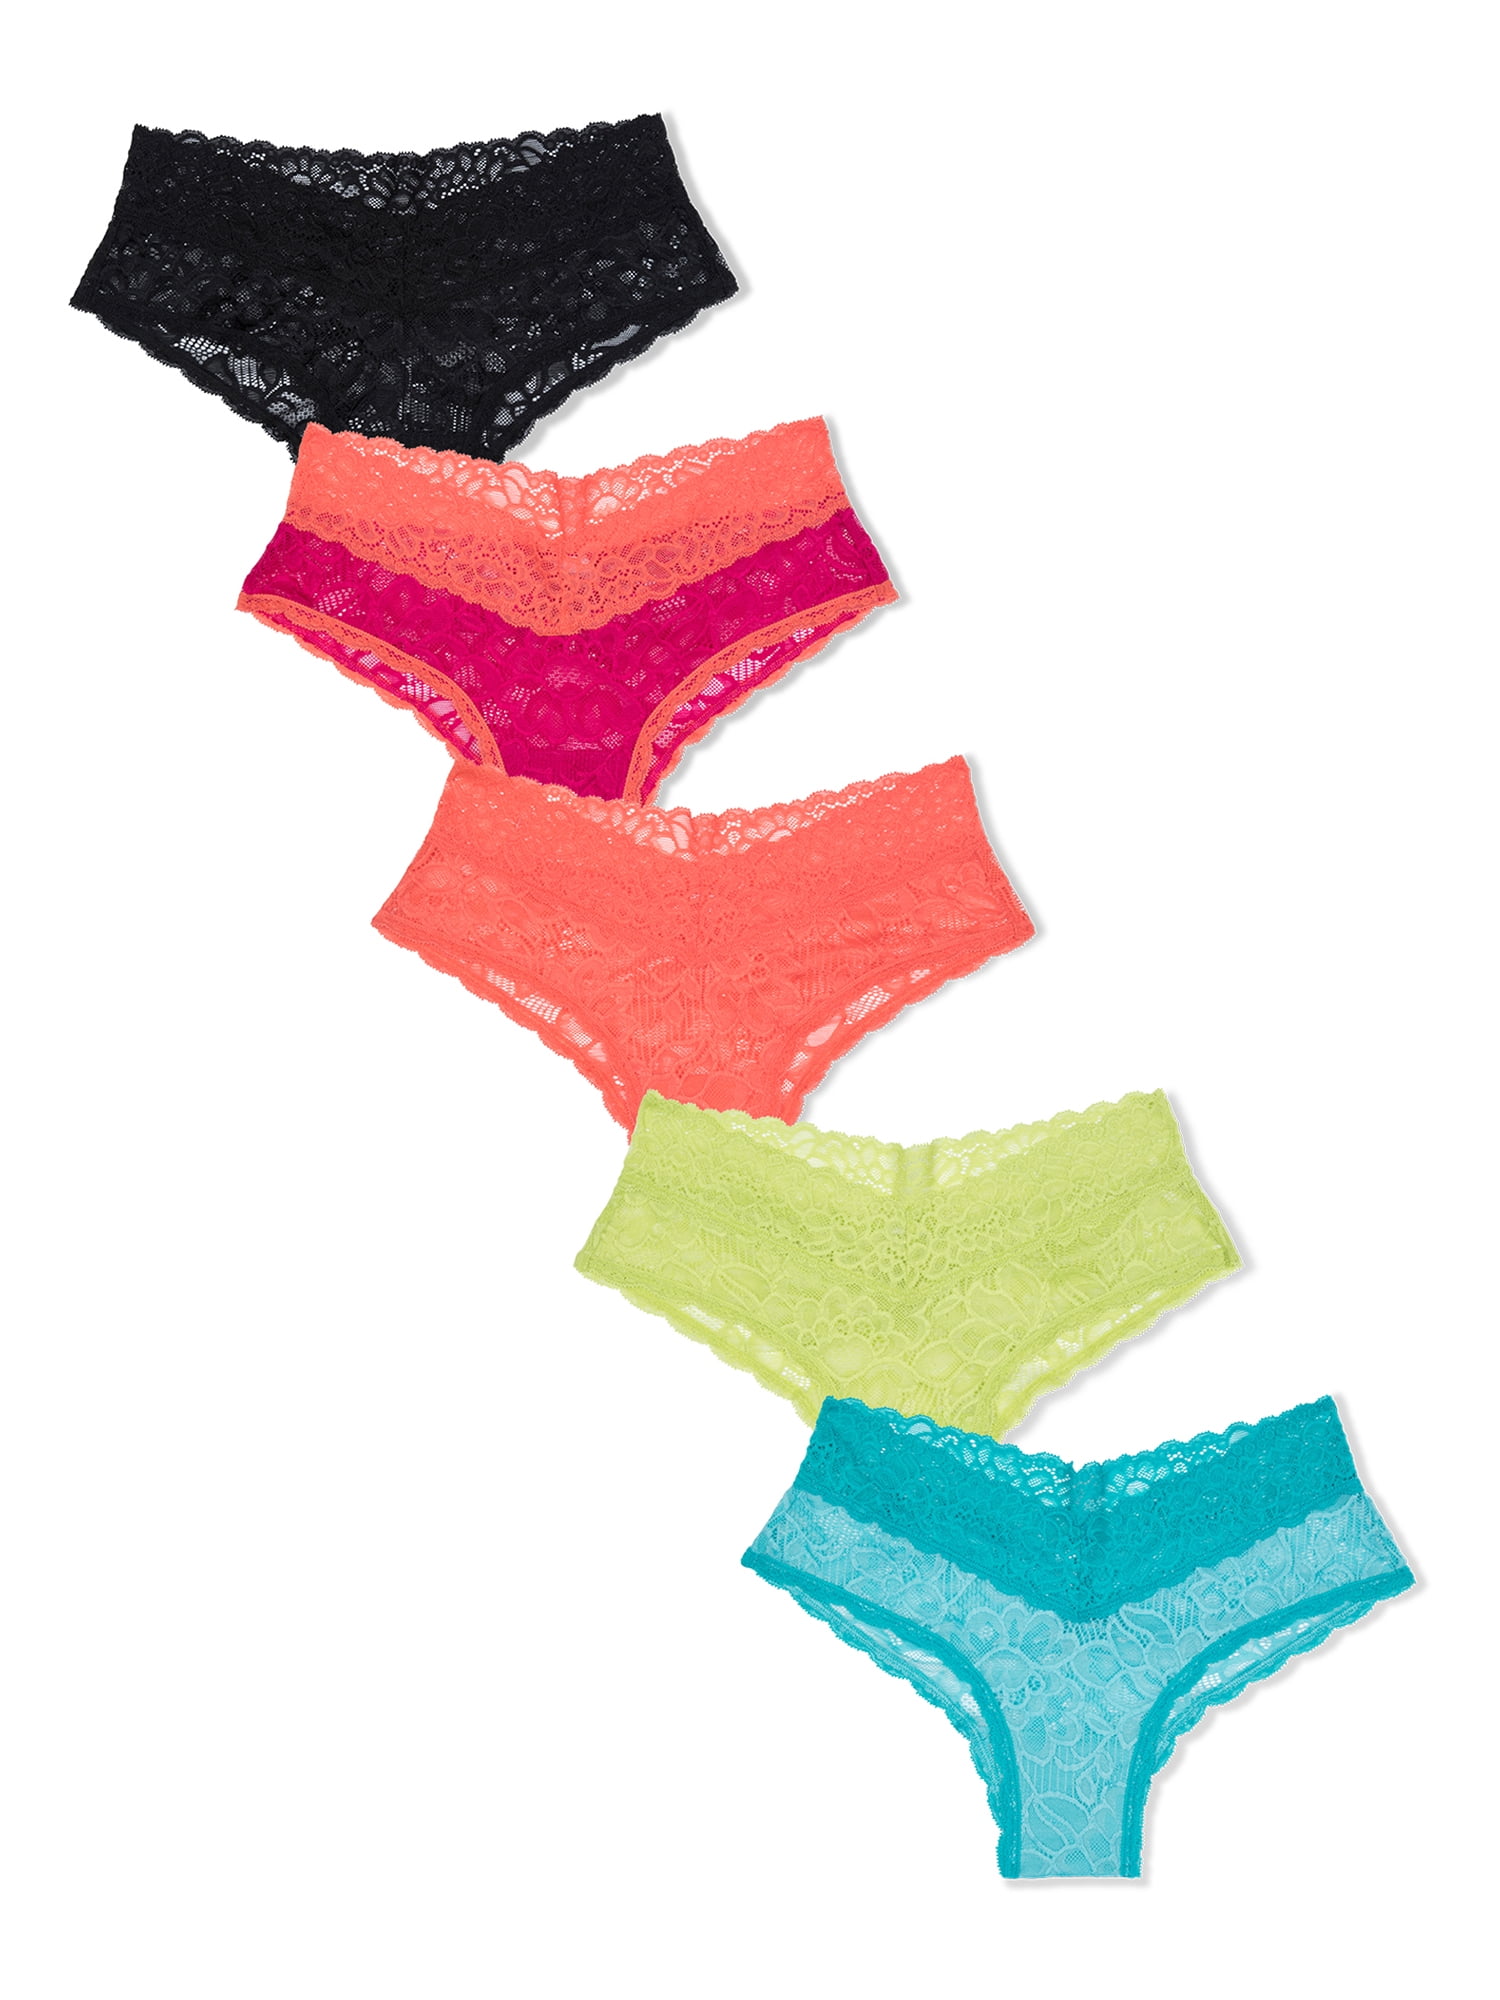 Flonica Cheeky Lace Panties for Women, Sexy Women's Tangas, Seamless No  Show Underwear, Pack of 6, Jet Black*1 Posy Green*1 Caribbean Sea Blue*1  Ruby Wine Red*1 Georgia Peach Pink*1 Snow White*1, Medium 